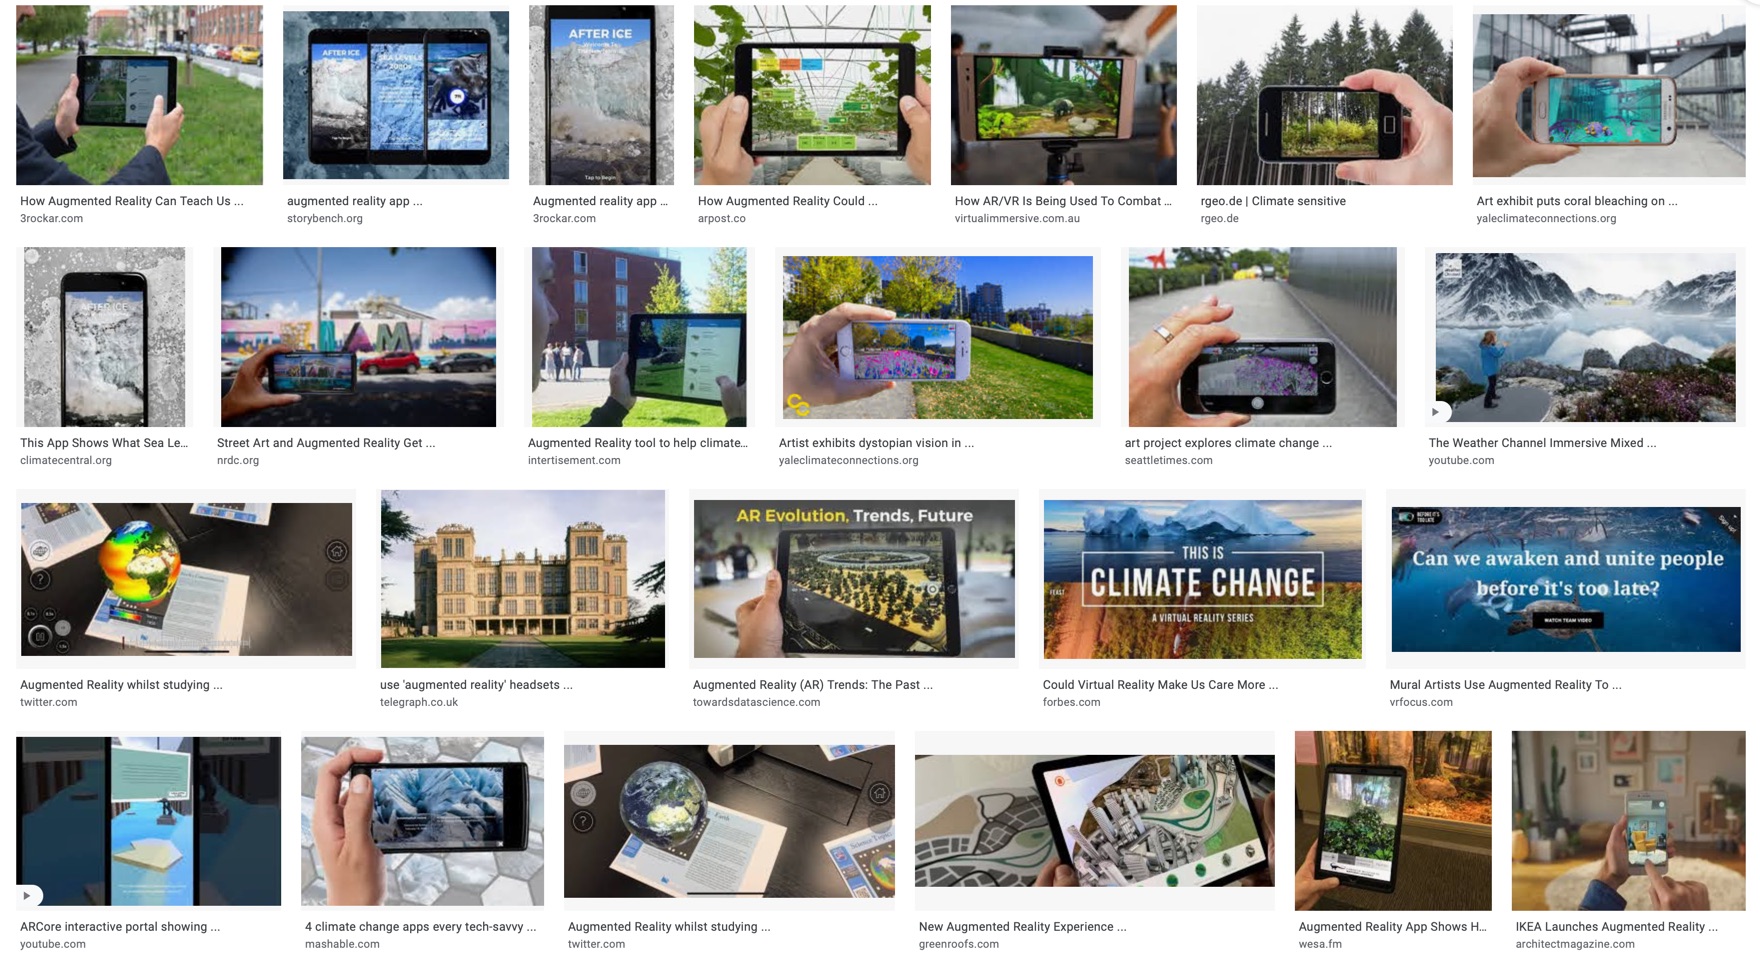 google images matching "augmented reality climate change"